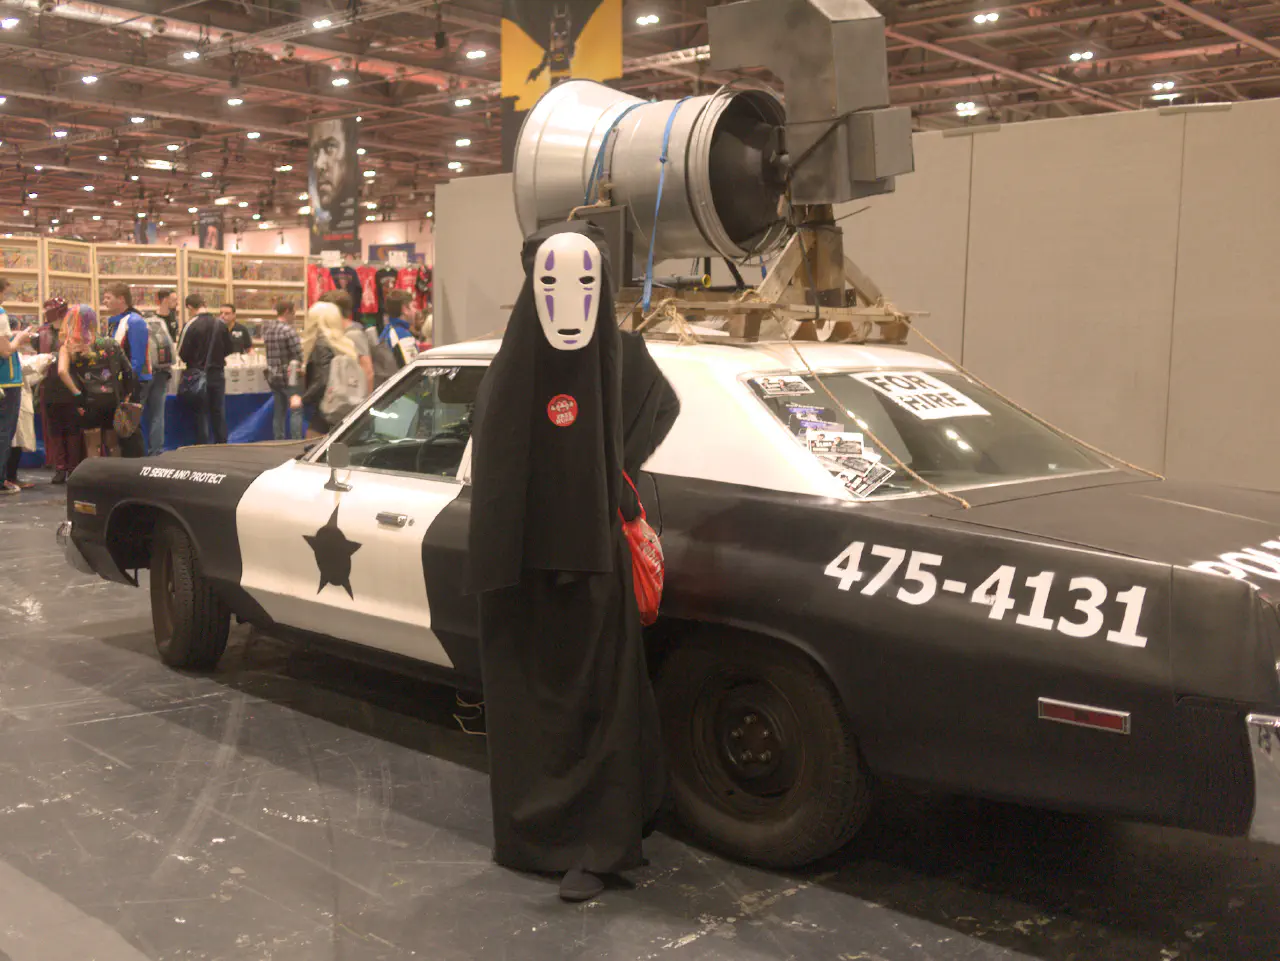 A figure draped in black obscuring any detail with a white and purple mask. They are standing in front of an old american style police car.